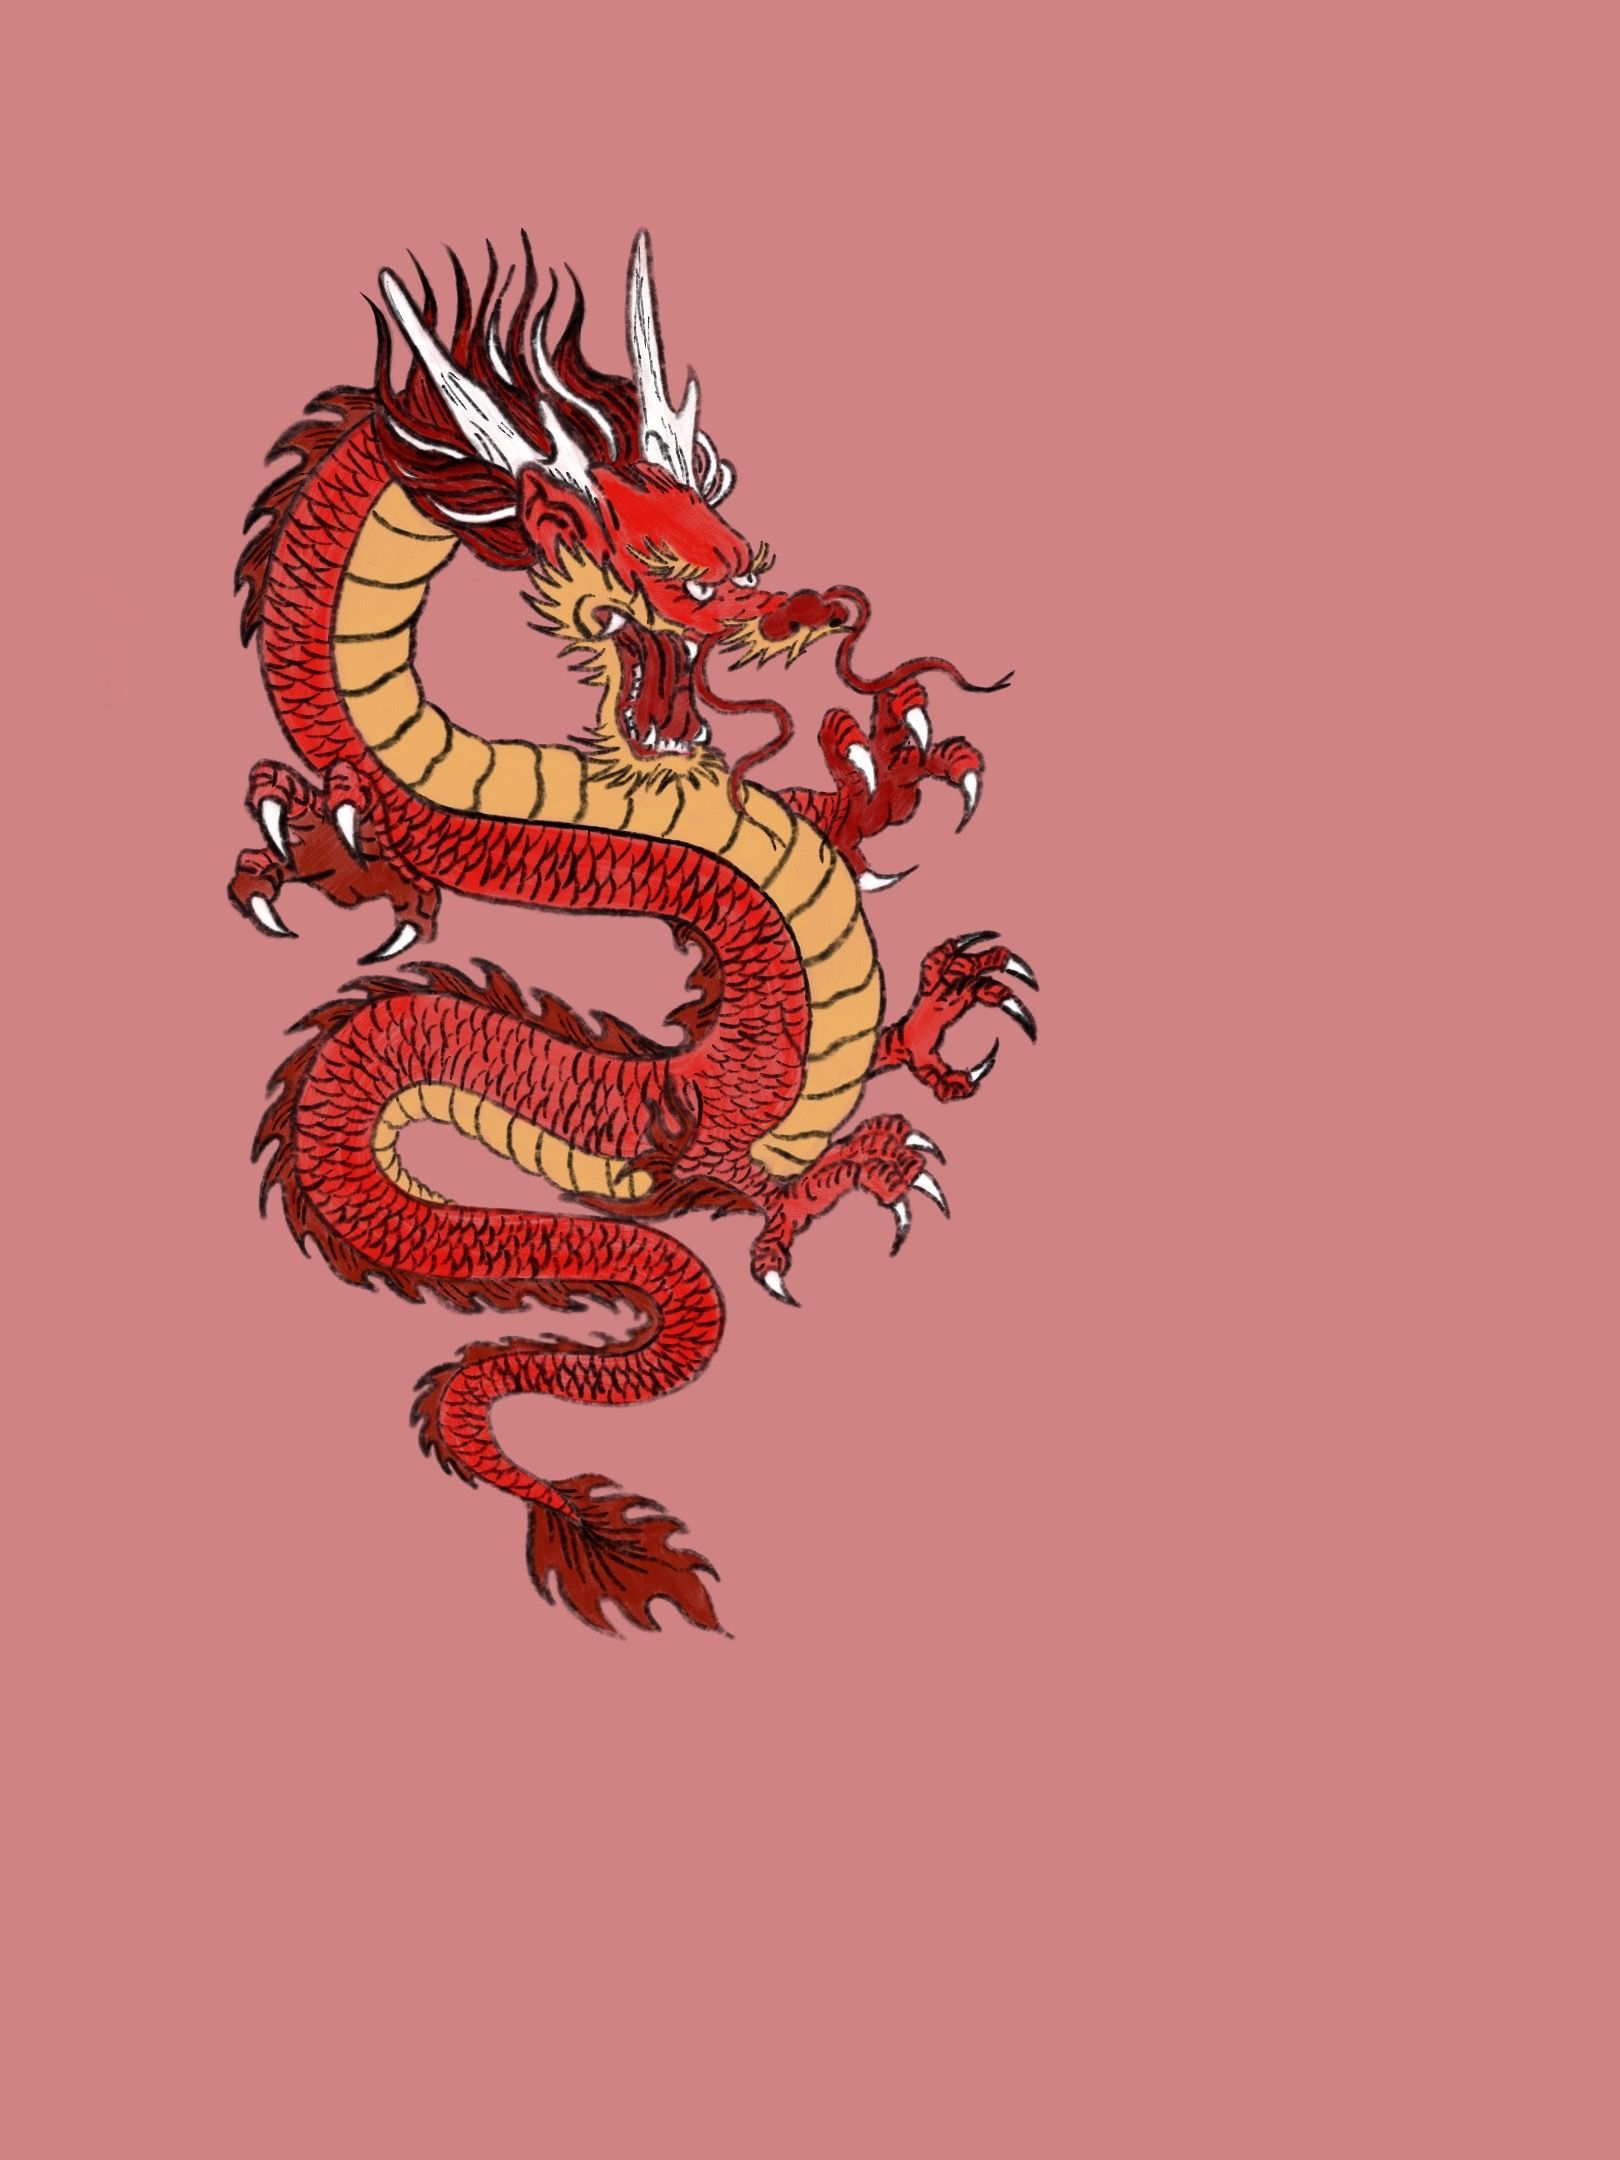 Japanese Dragon Aesthetic Wallpapers.